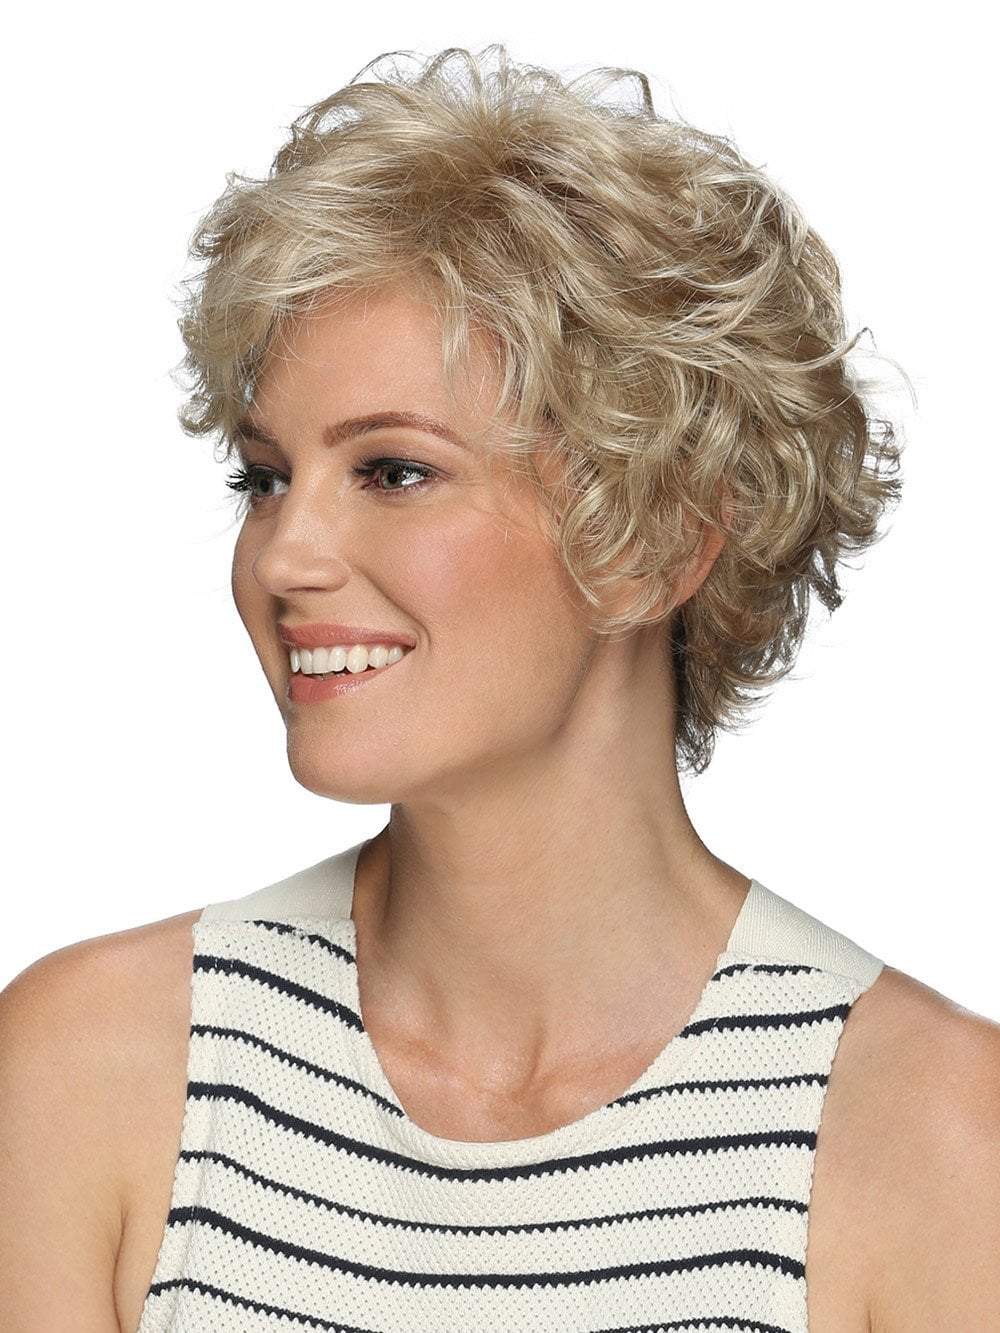 With her beautiful loose spiral curls, this layered bob looks great with any face shape